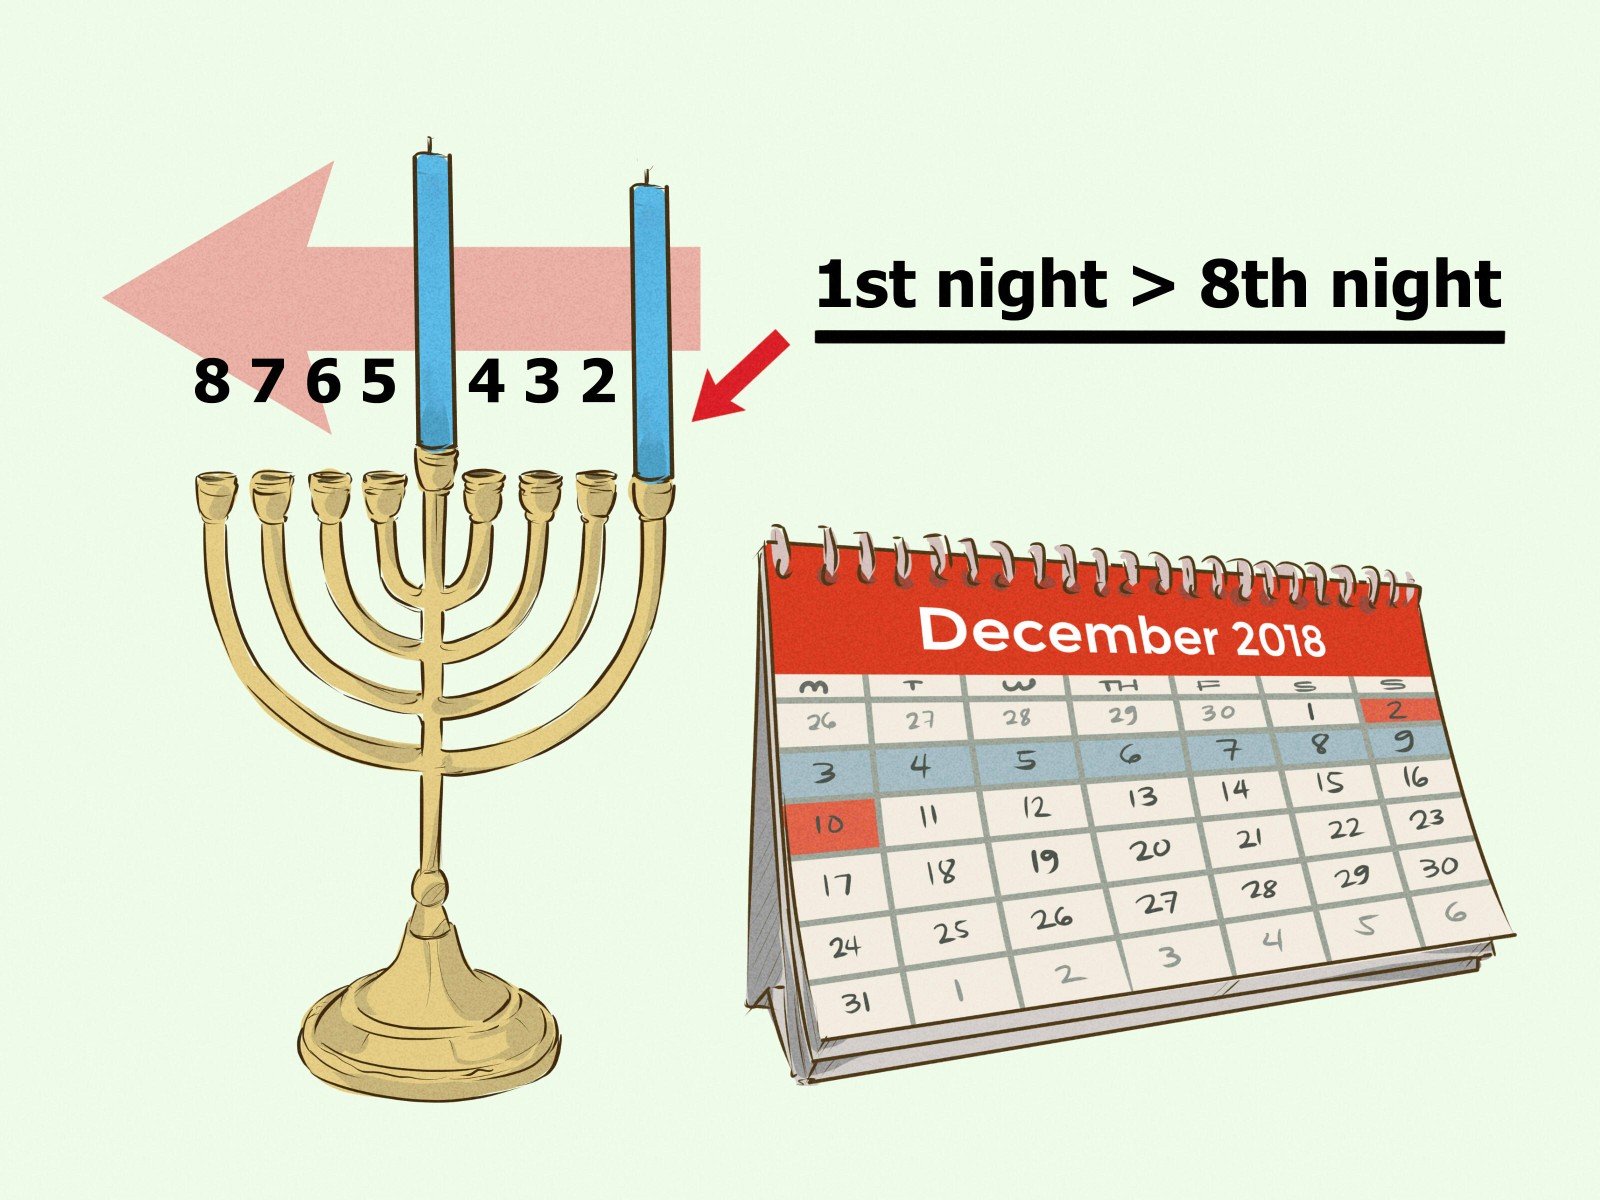 The world is oversaturated in December with thoughts of Christmas, so Hanukkah often gets overlooked. If you're wondering what is Hanukkah, read here. 